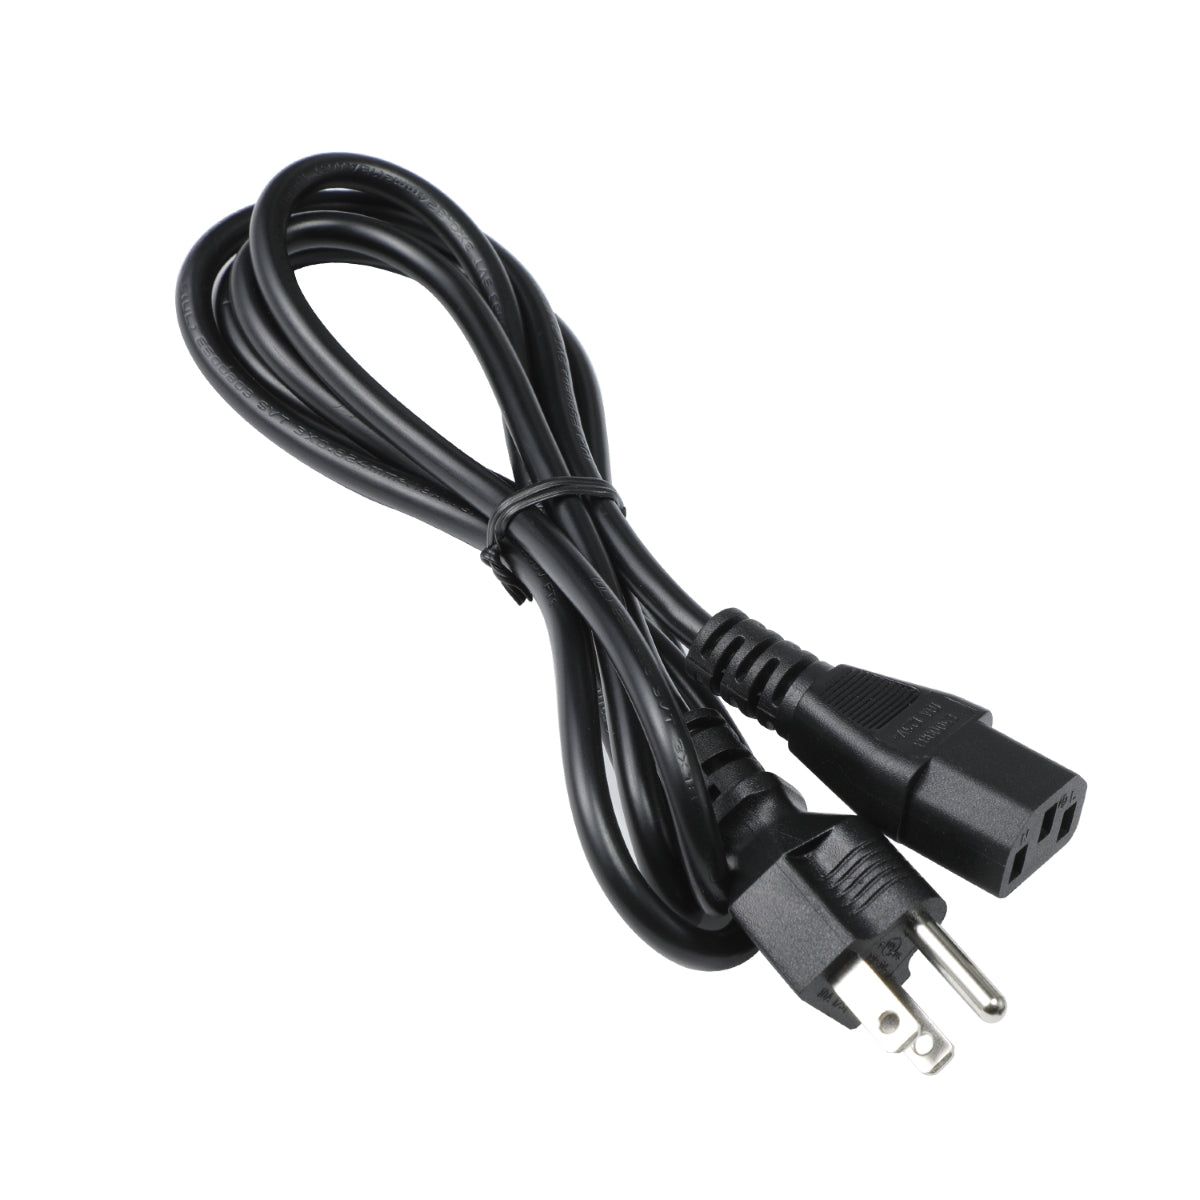 Power Cable for Philips 243S5LDAB Monitor.